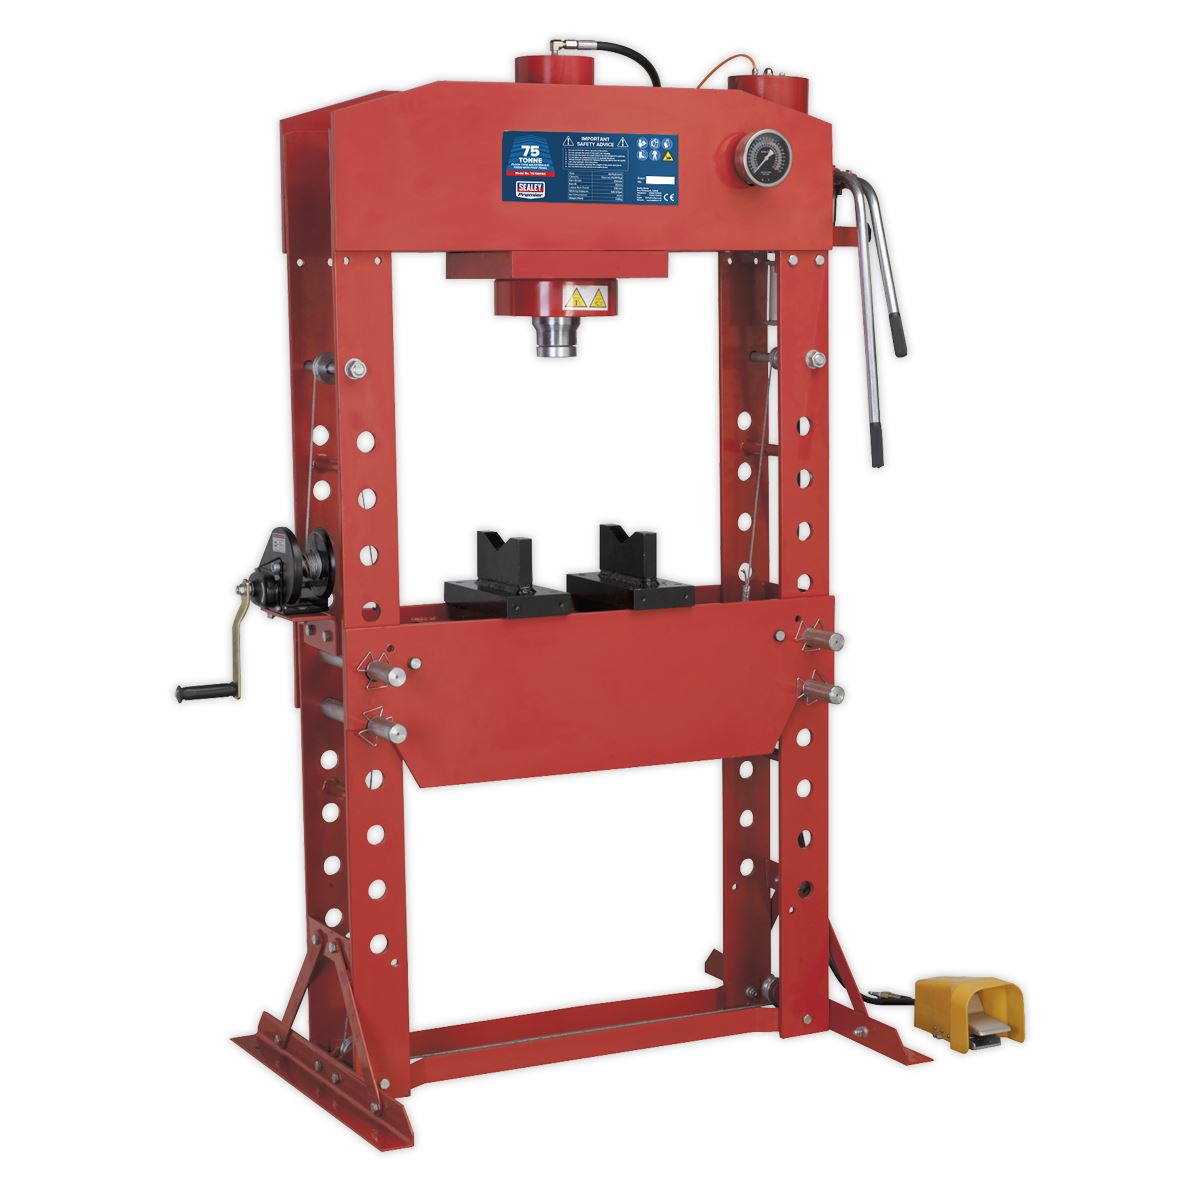 Sealey Premier Air/Hydraulic Press 75 Tonne Floor Type with Foot Pedal